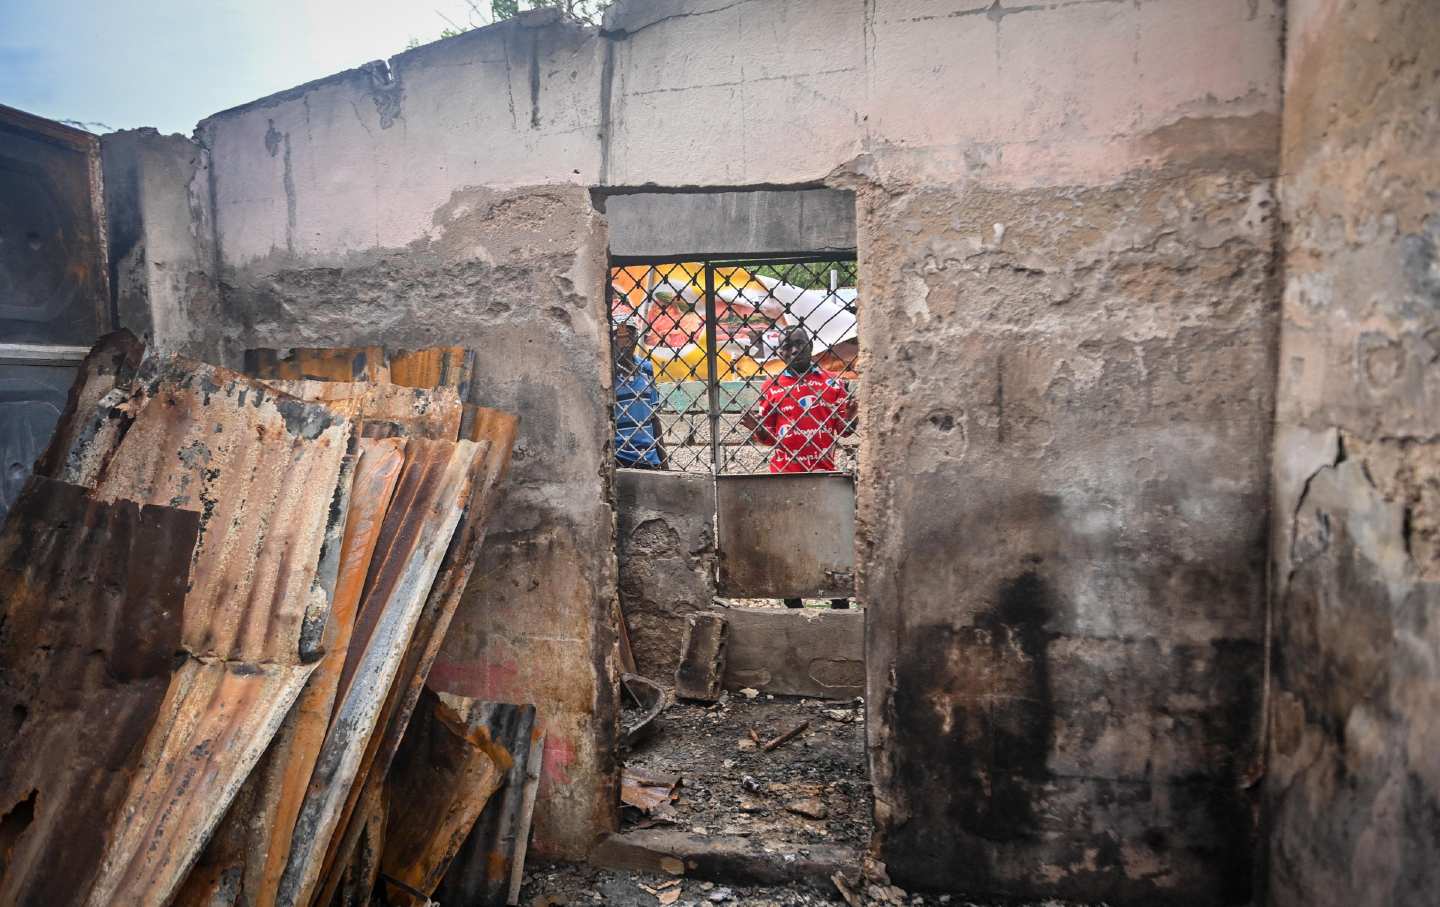 Men look through the window of a burnt-out house near Fontaine Hospital in Port-au-Prince, Haiti